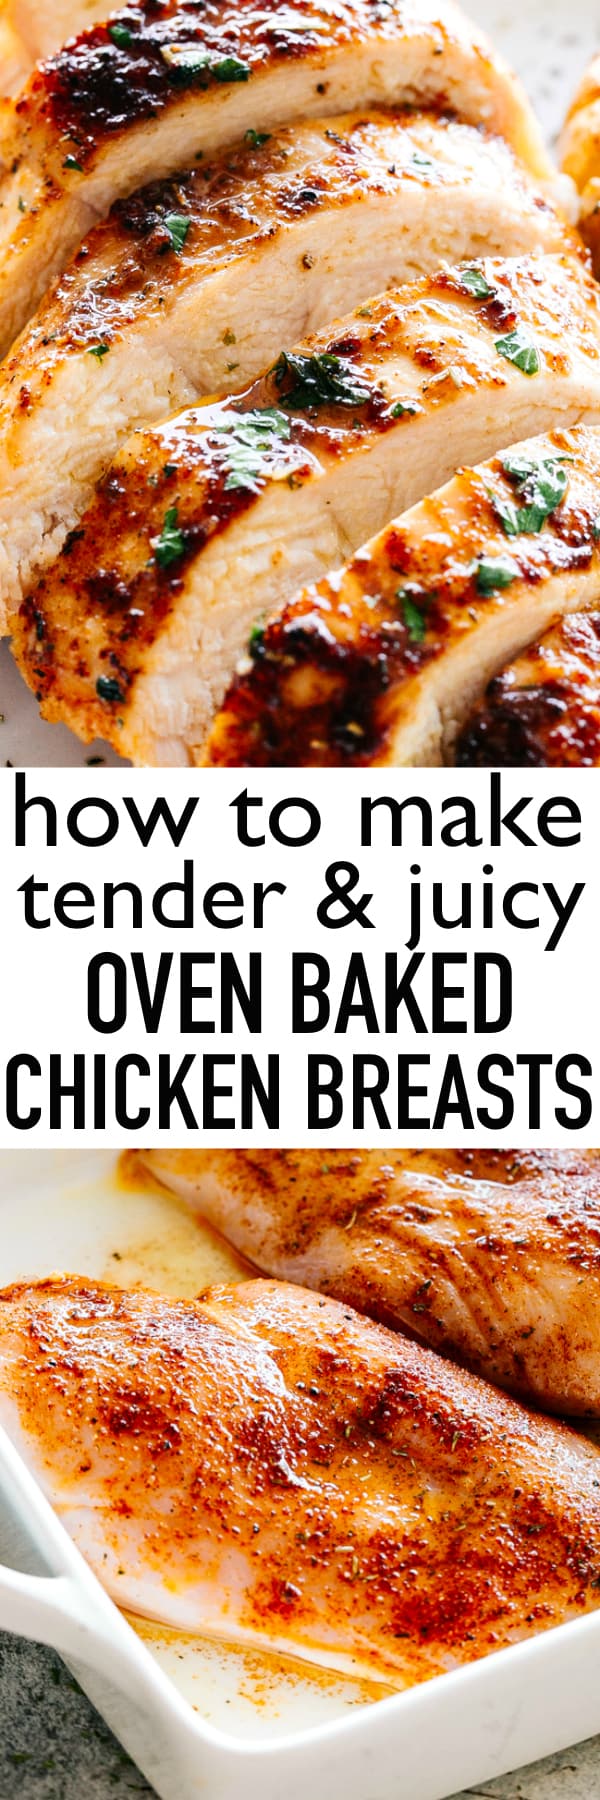 Oven Baked Chicken Breasts | The BEST Way to Bake Chicken ...